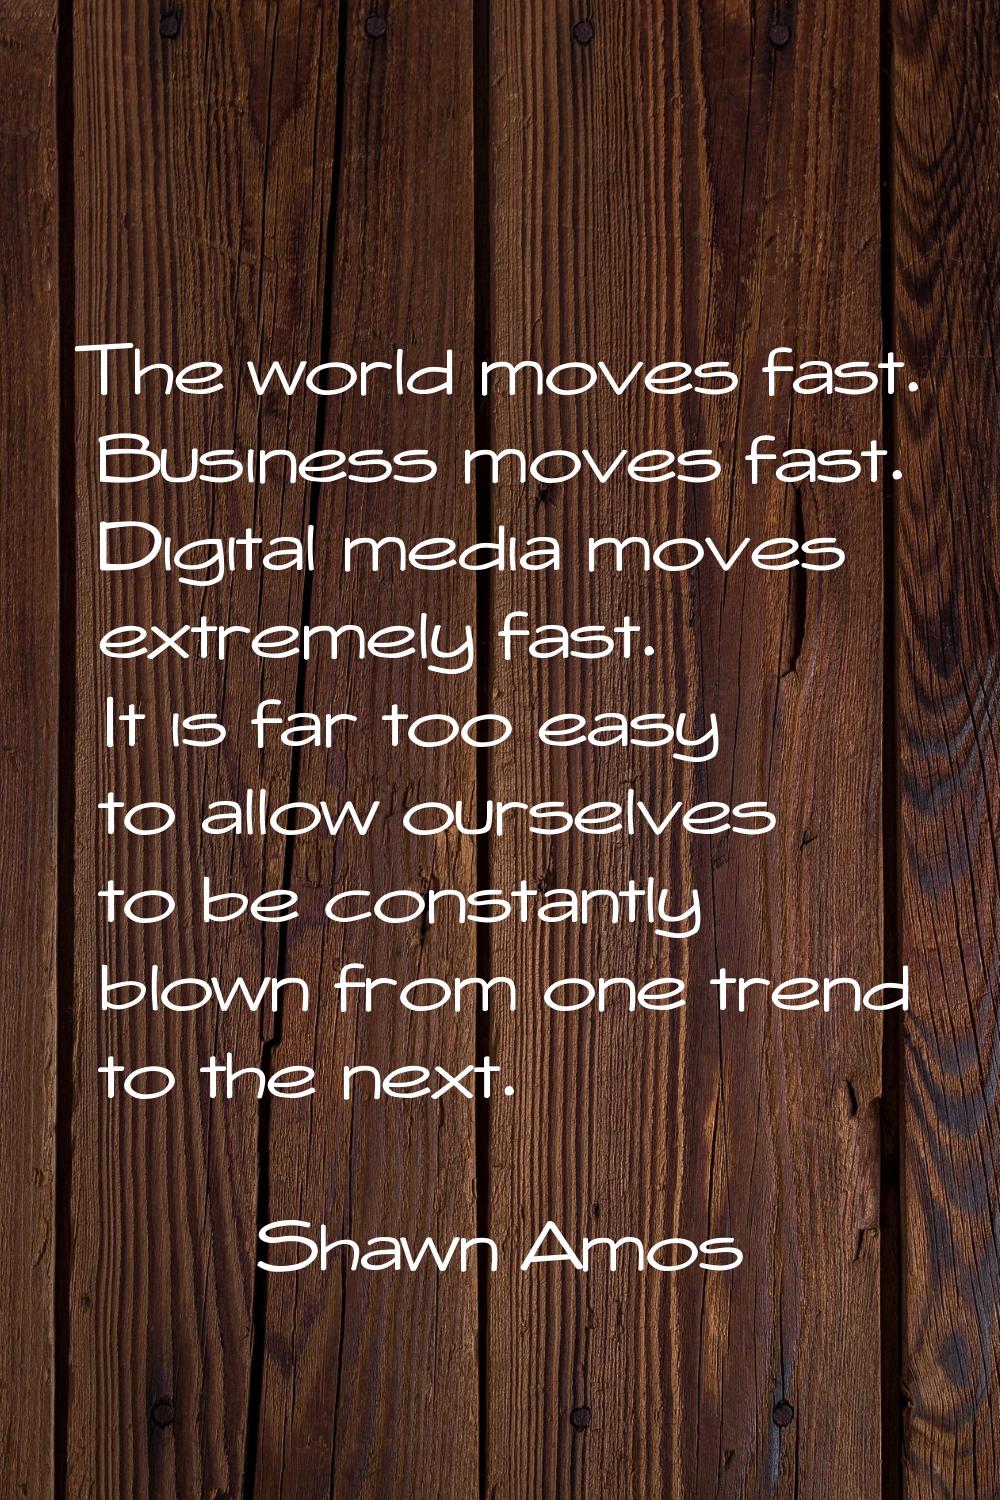 The world moves fast. Business moves fast. Digital media moves extremely fast. It is far too easy t